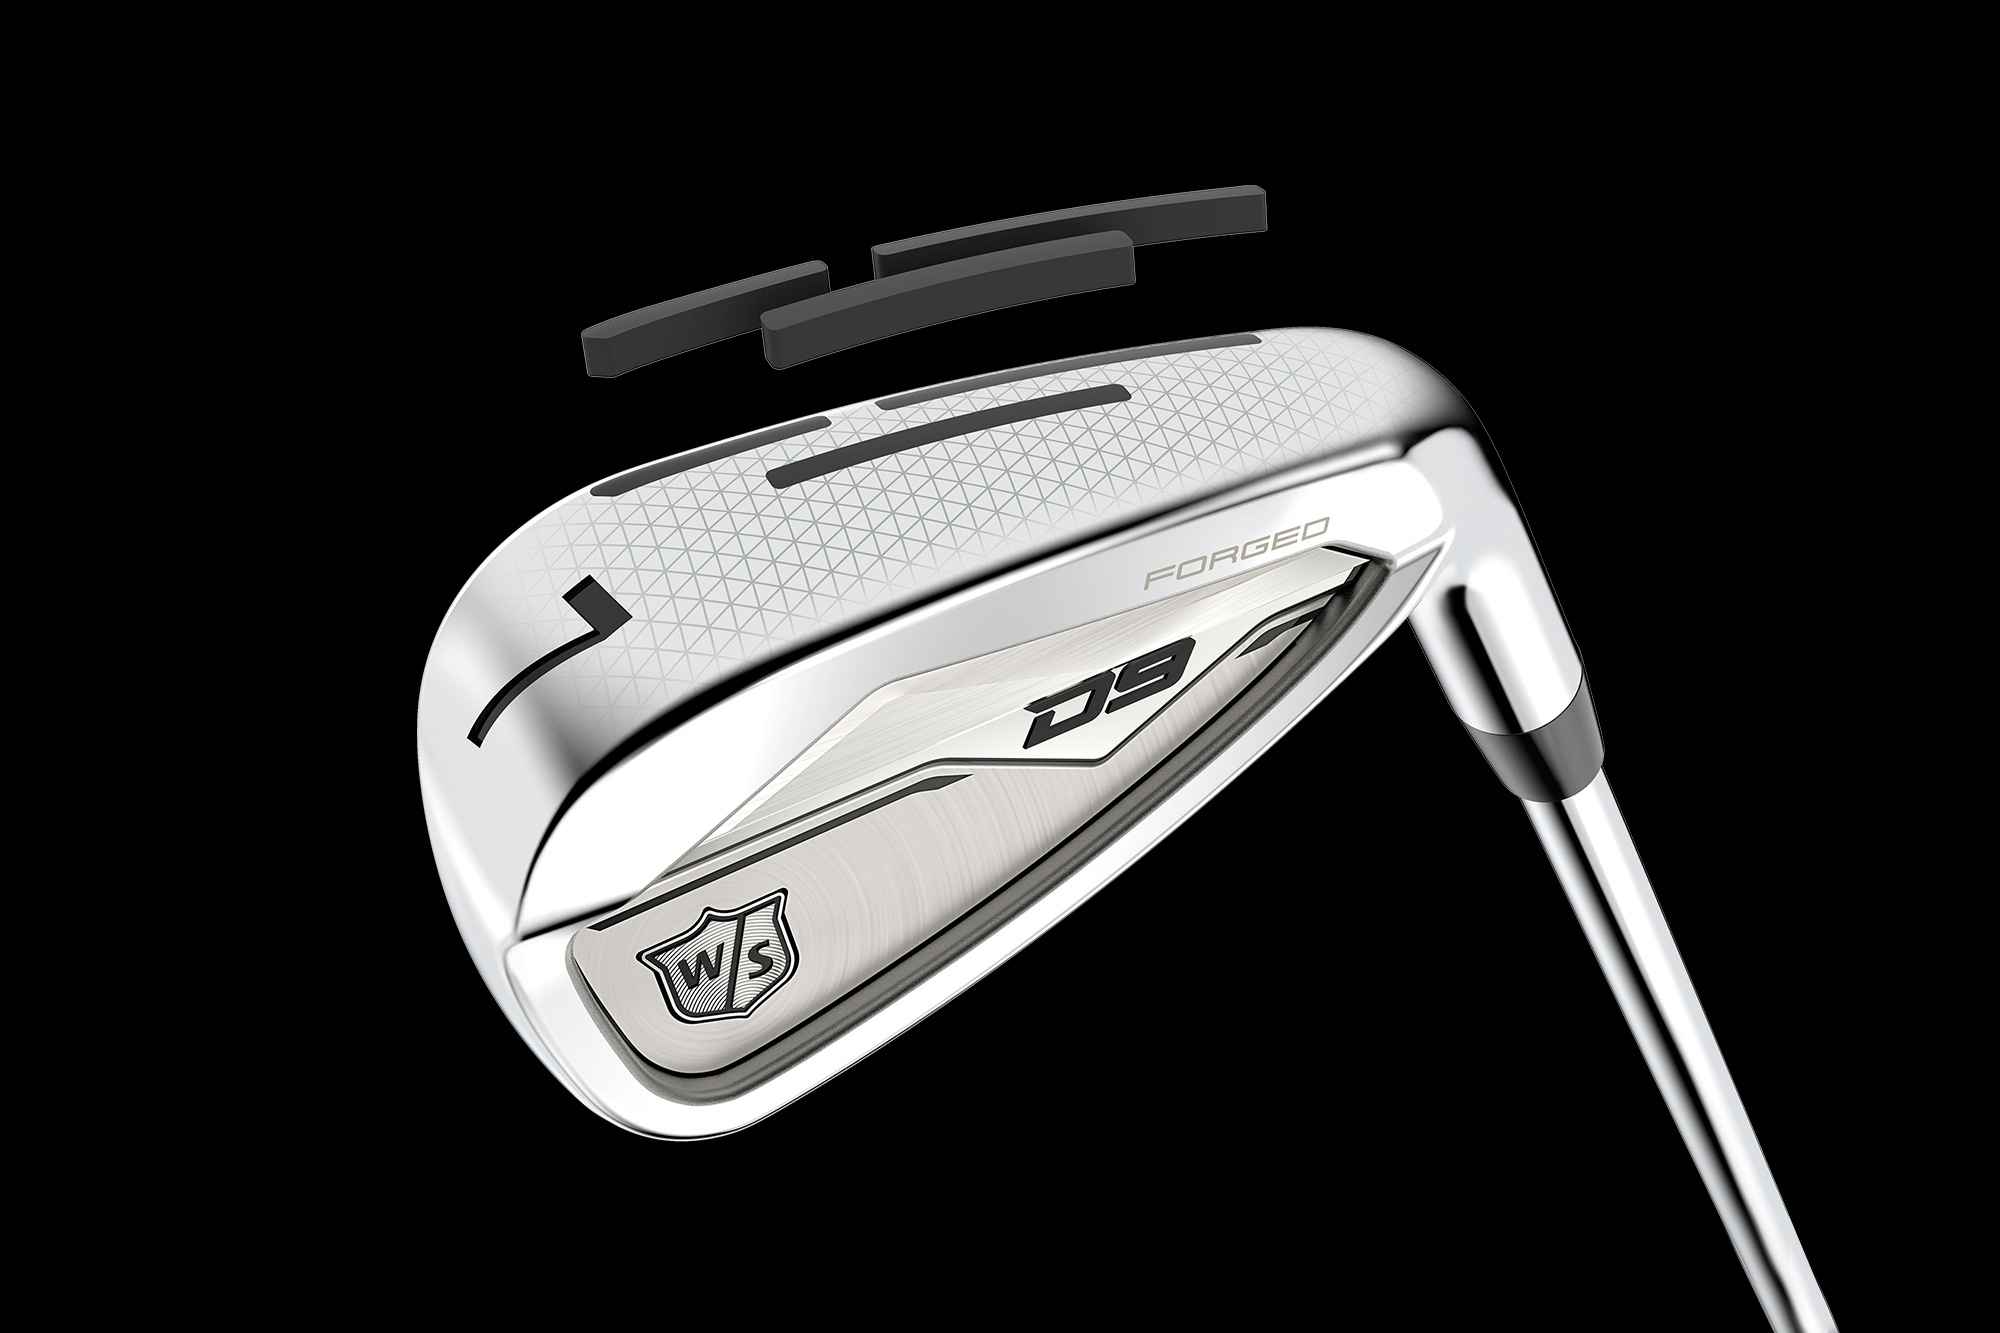 Wilson D9 forged irons review